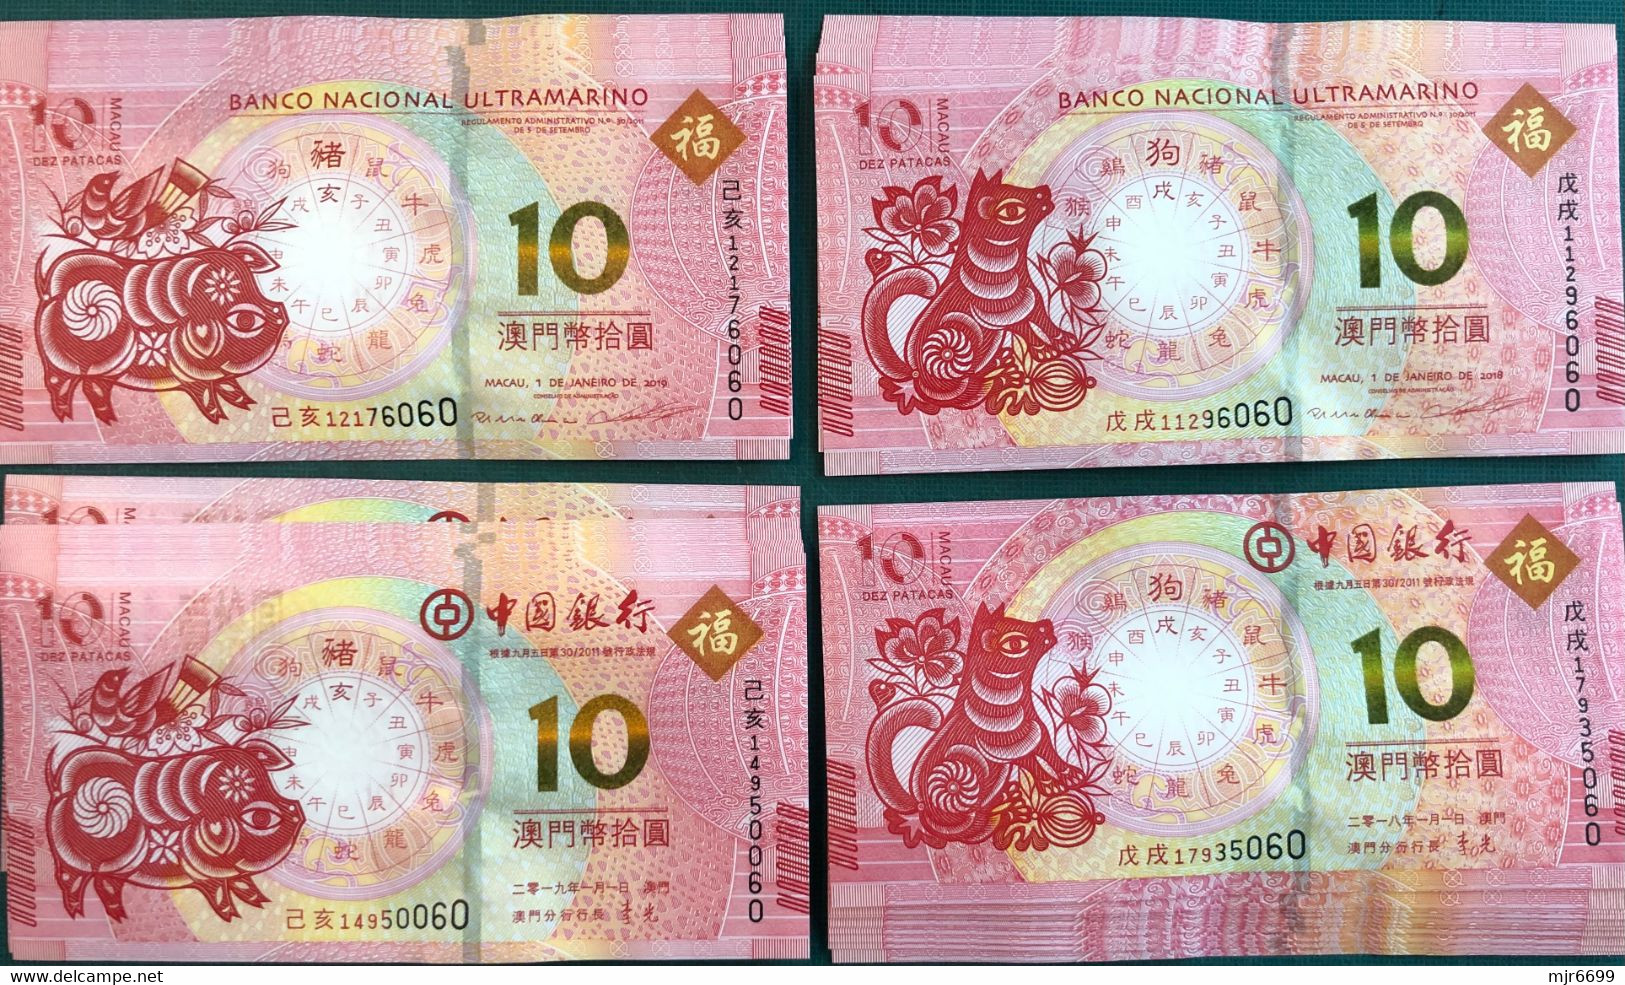 BNU/ BOC 2018-2019 - YEAR OF THE DOG & PIG 10 PATACAS X 4 PIECES - UNC (NOTE: SERIAL NUMBER IS DIFFERENT) - Macao